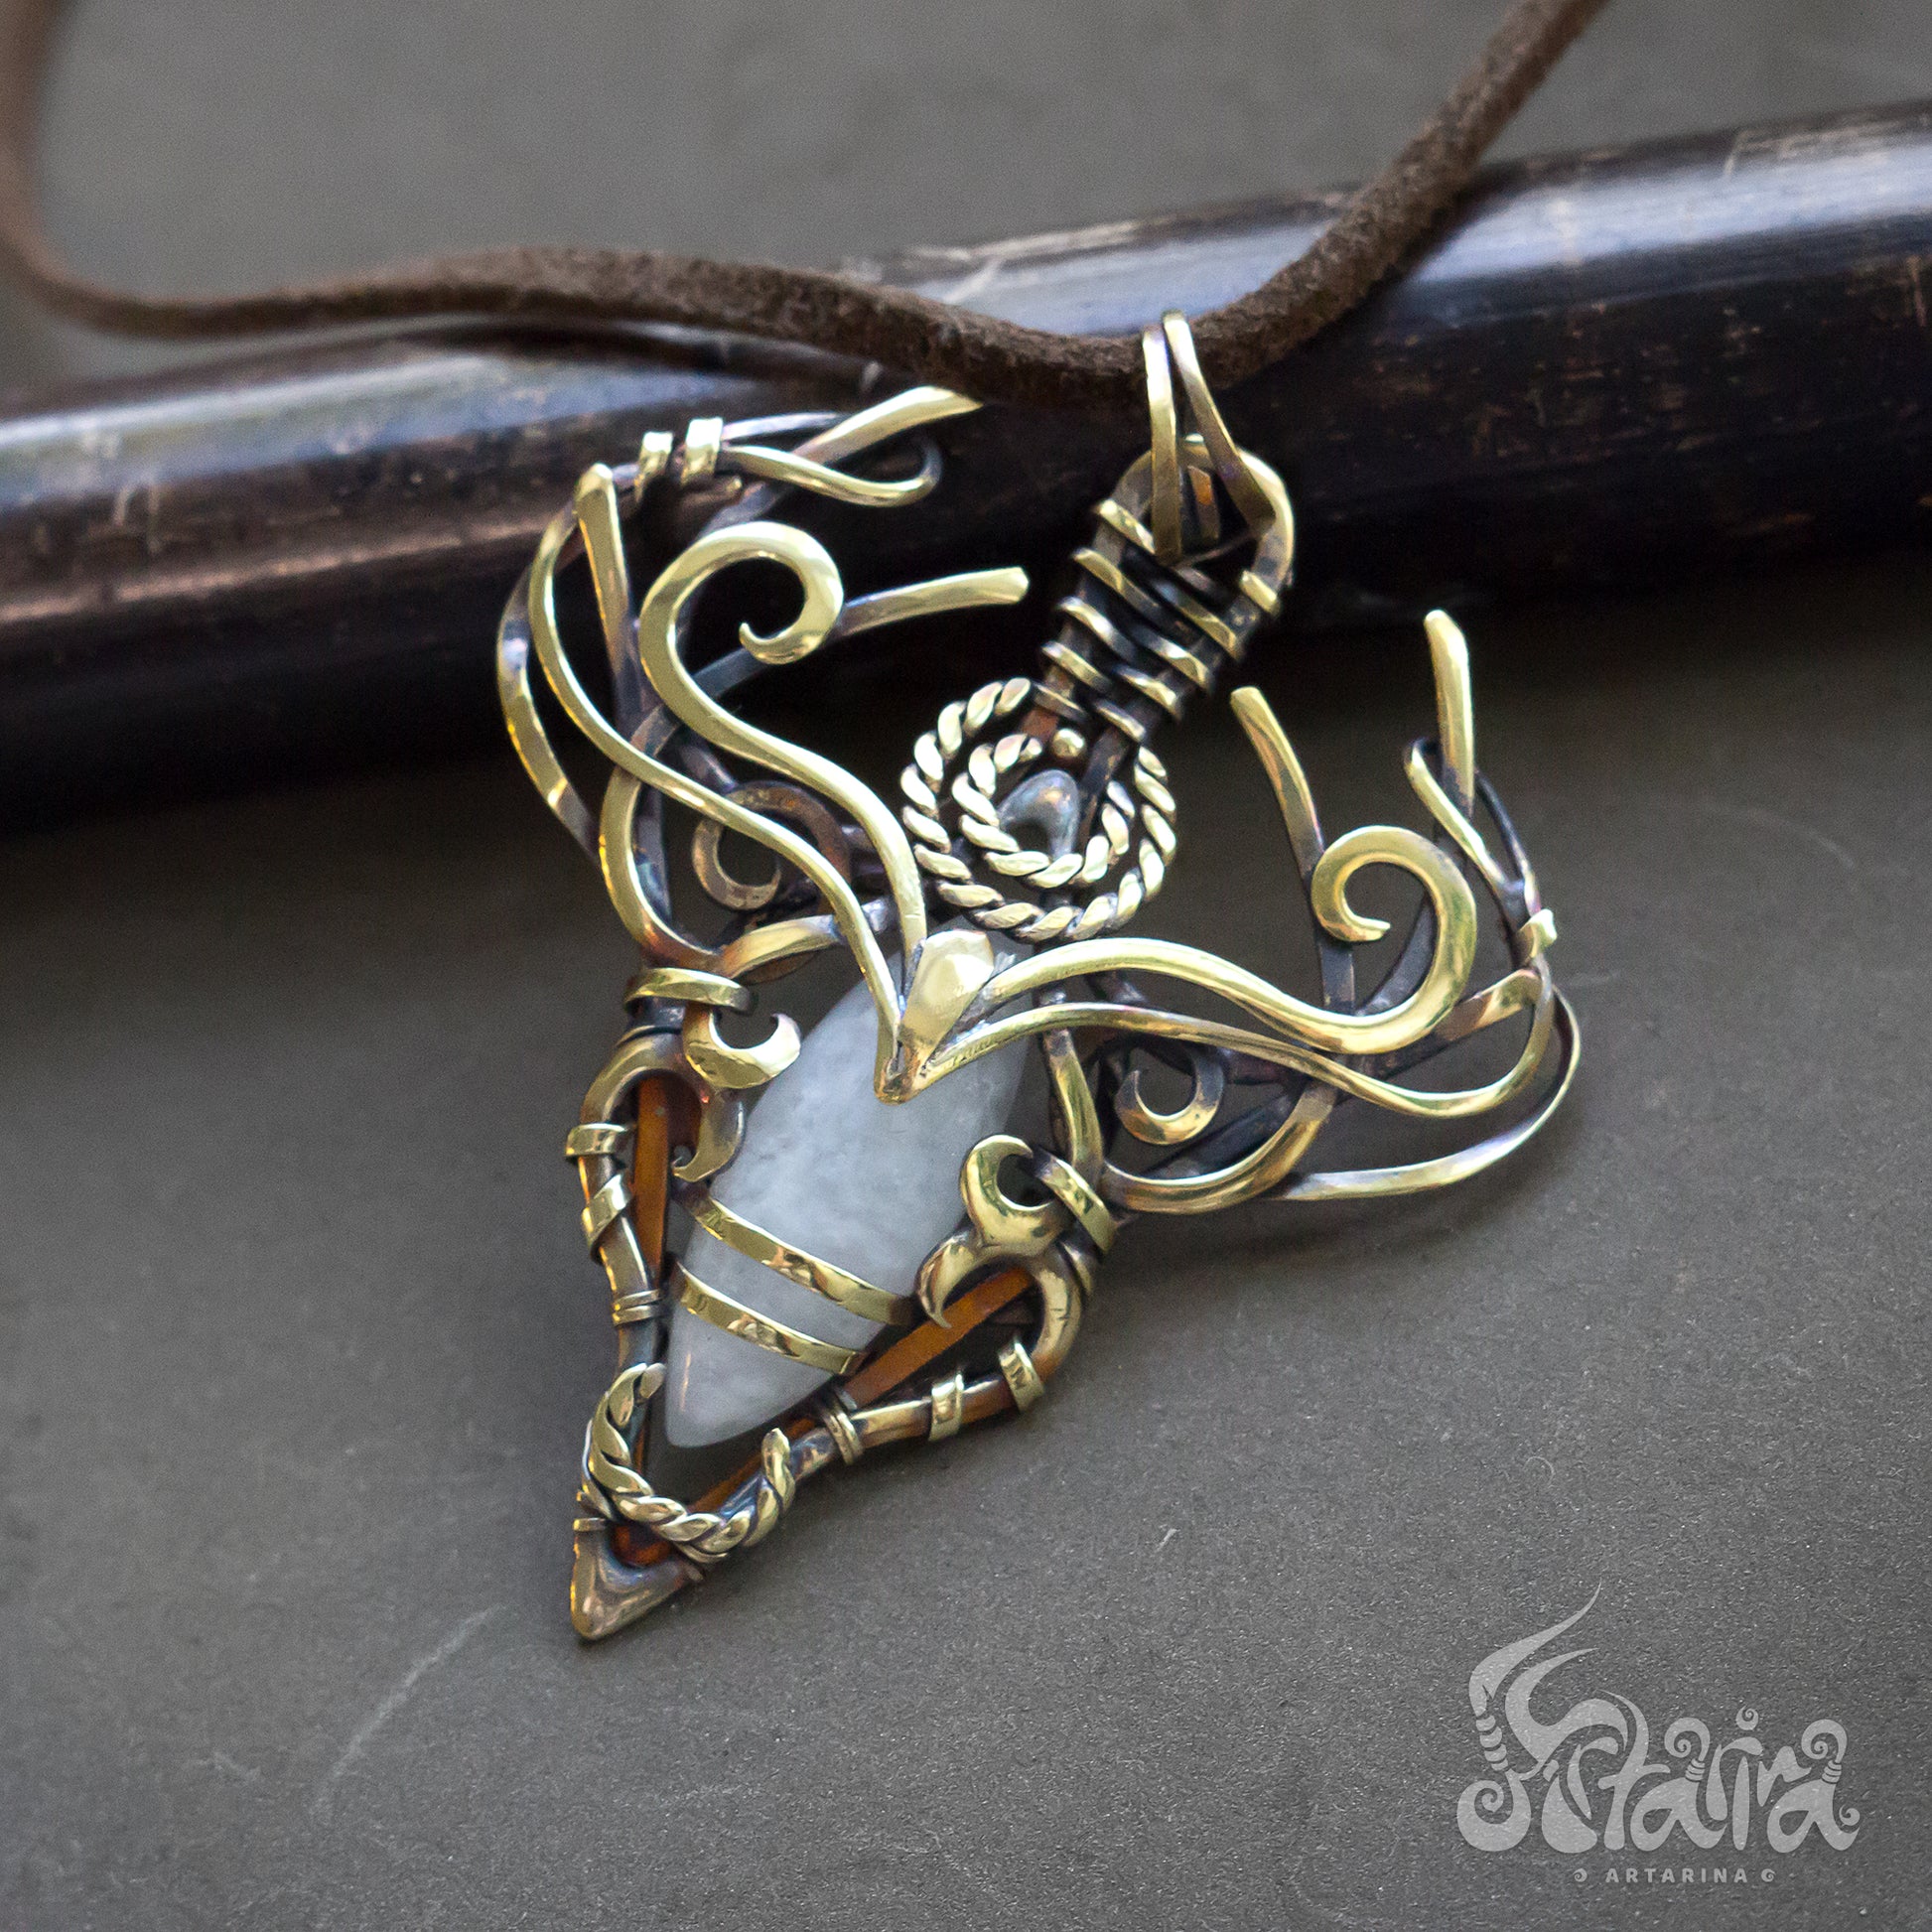 Brass Wire Wrapped Gemstone Pendant Golden colored Designer Pendant Gift For Her solid brass metalwork necklace with white moonstone Elven golden metalwork necklace JRPG jewelry fantasy geek nerd gift Dragon pendant by Artarina